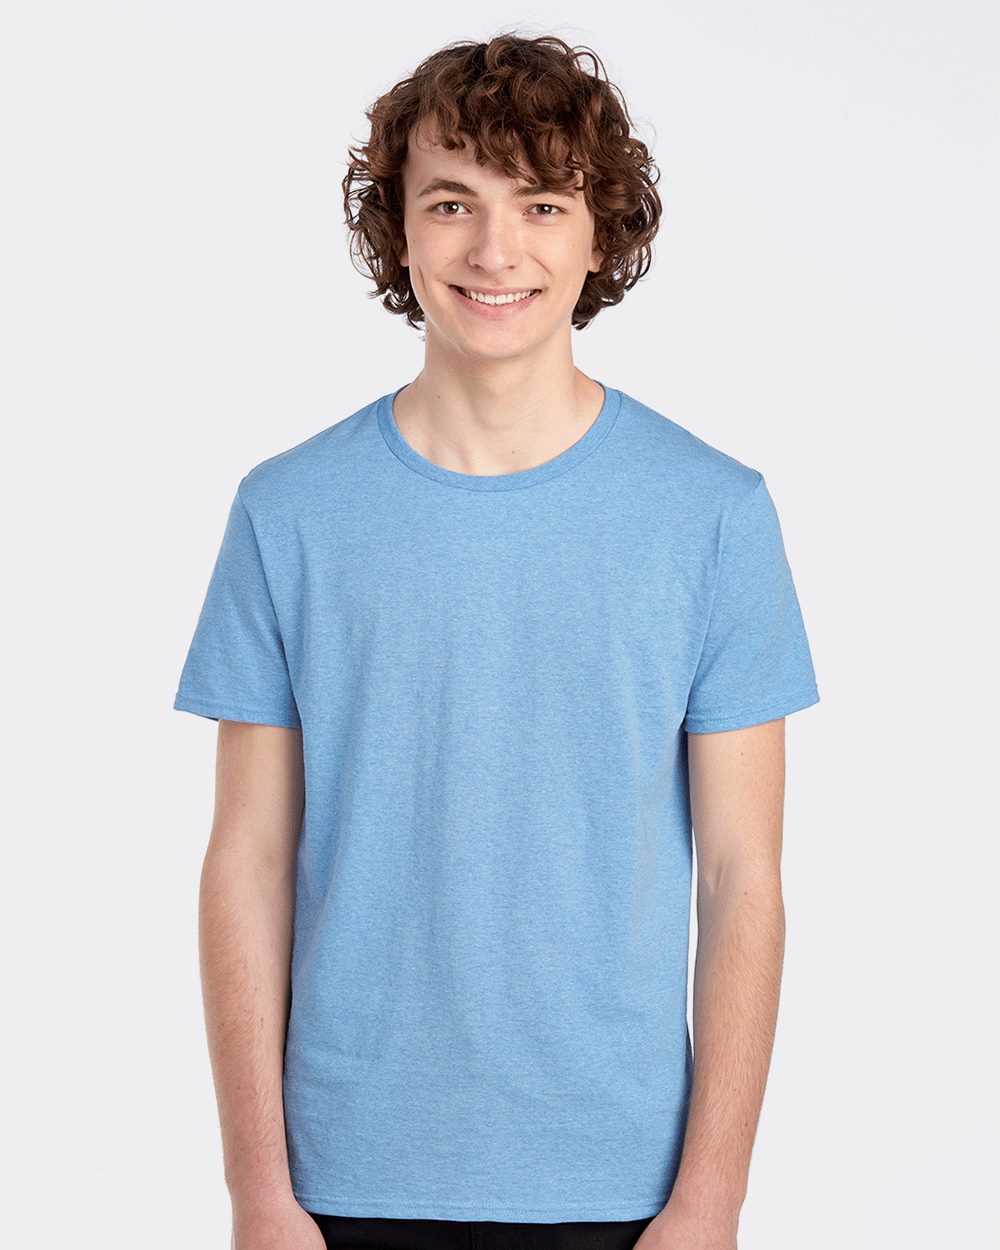 Mens Plain T-Shirt / Fruit of the Loom Iconic Soft Tee - BEST PRICE ON